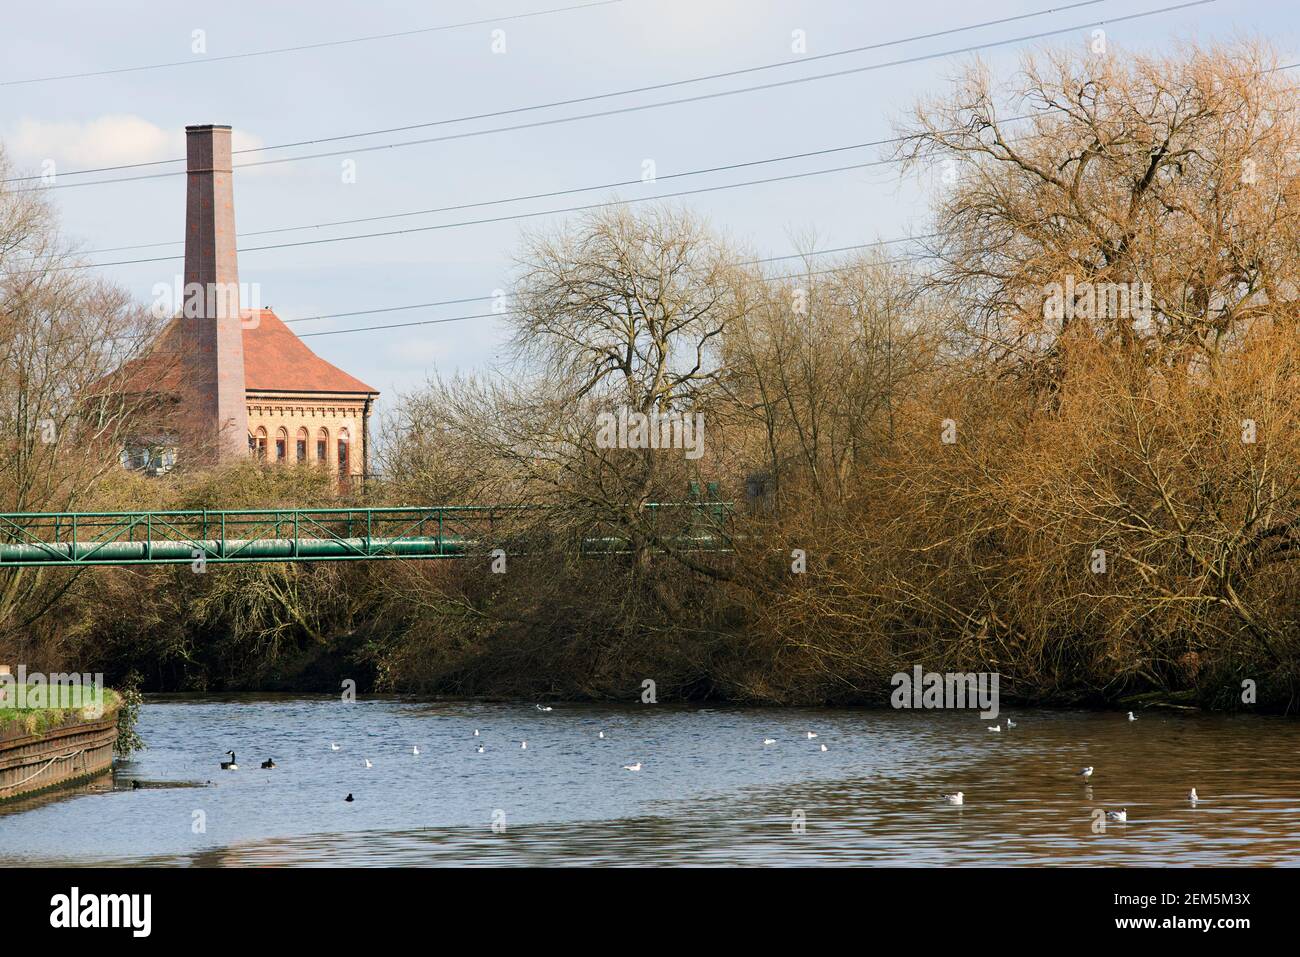 The River Lea in winter near Walthamstow Wetlands, with the historic Engine House building in the background Stock Photo